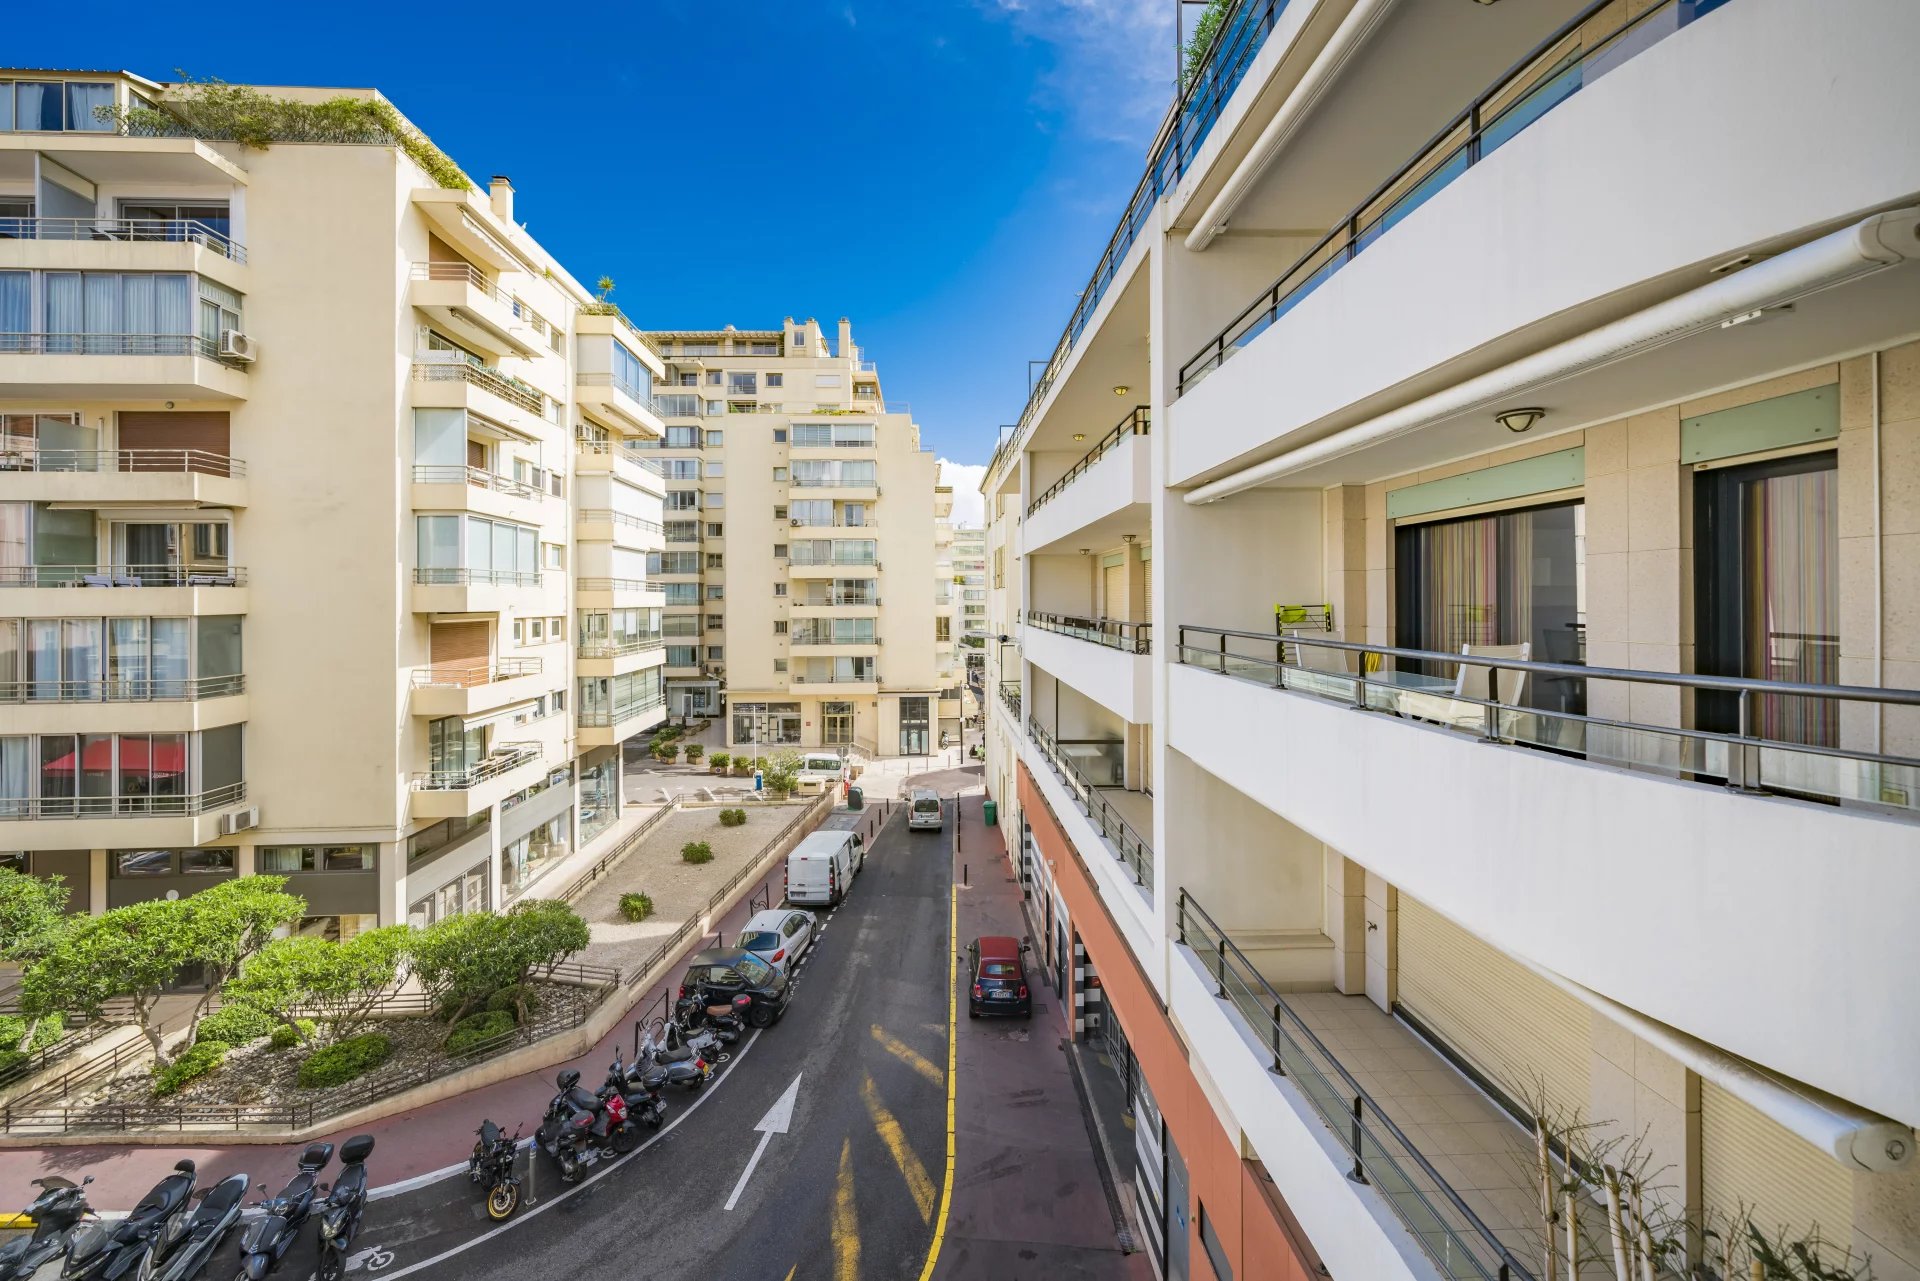 Rental apartment Cannes center, next to Croisette and convention center